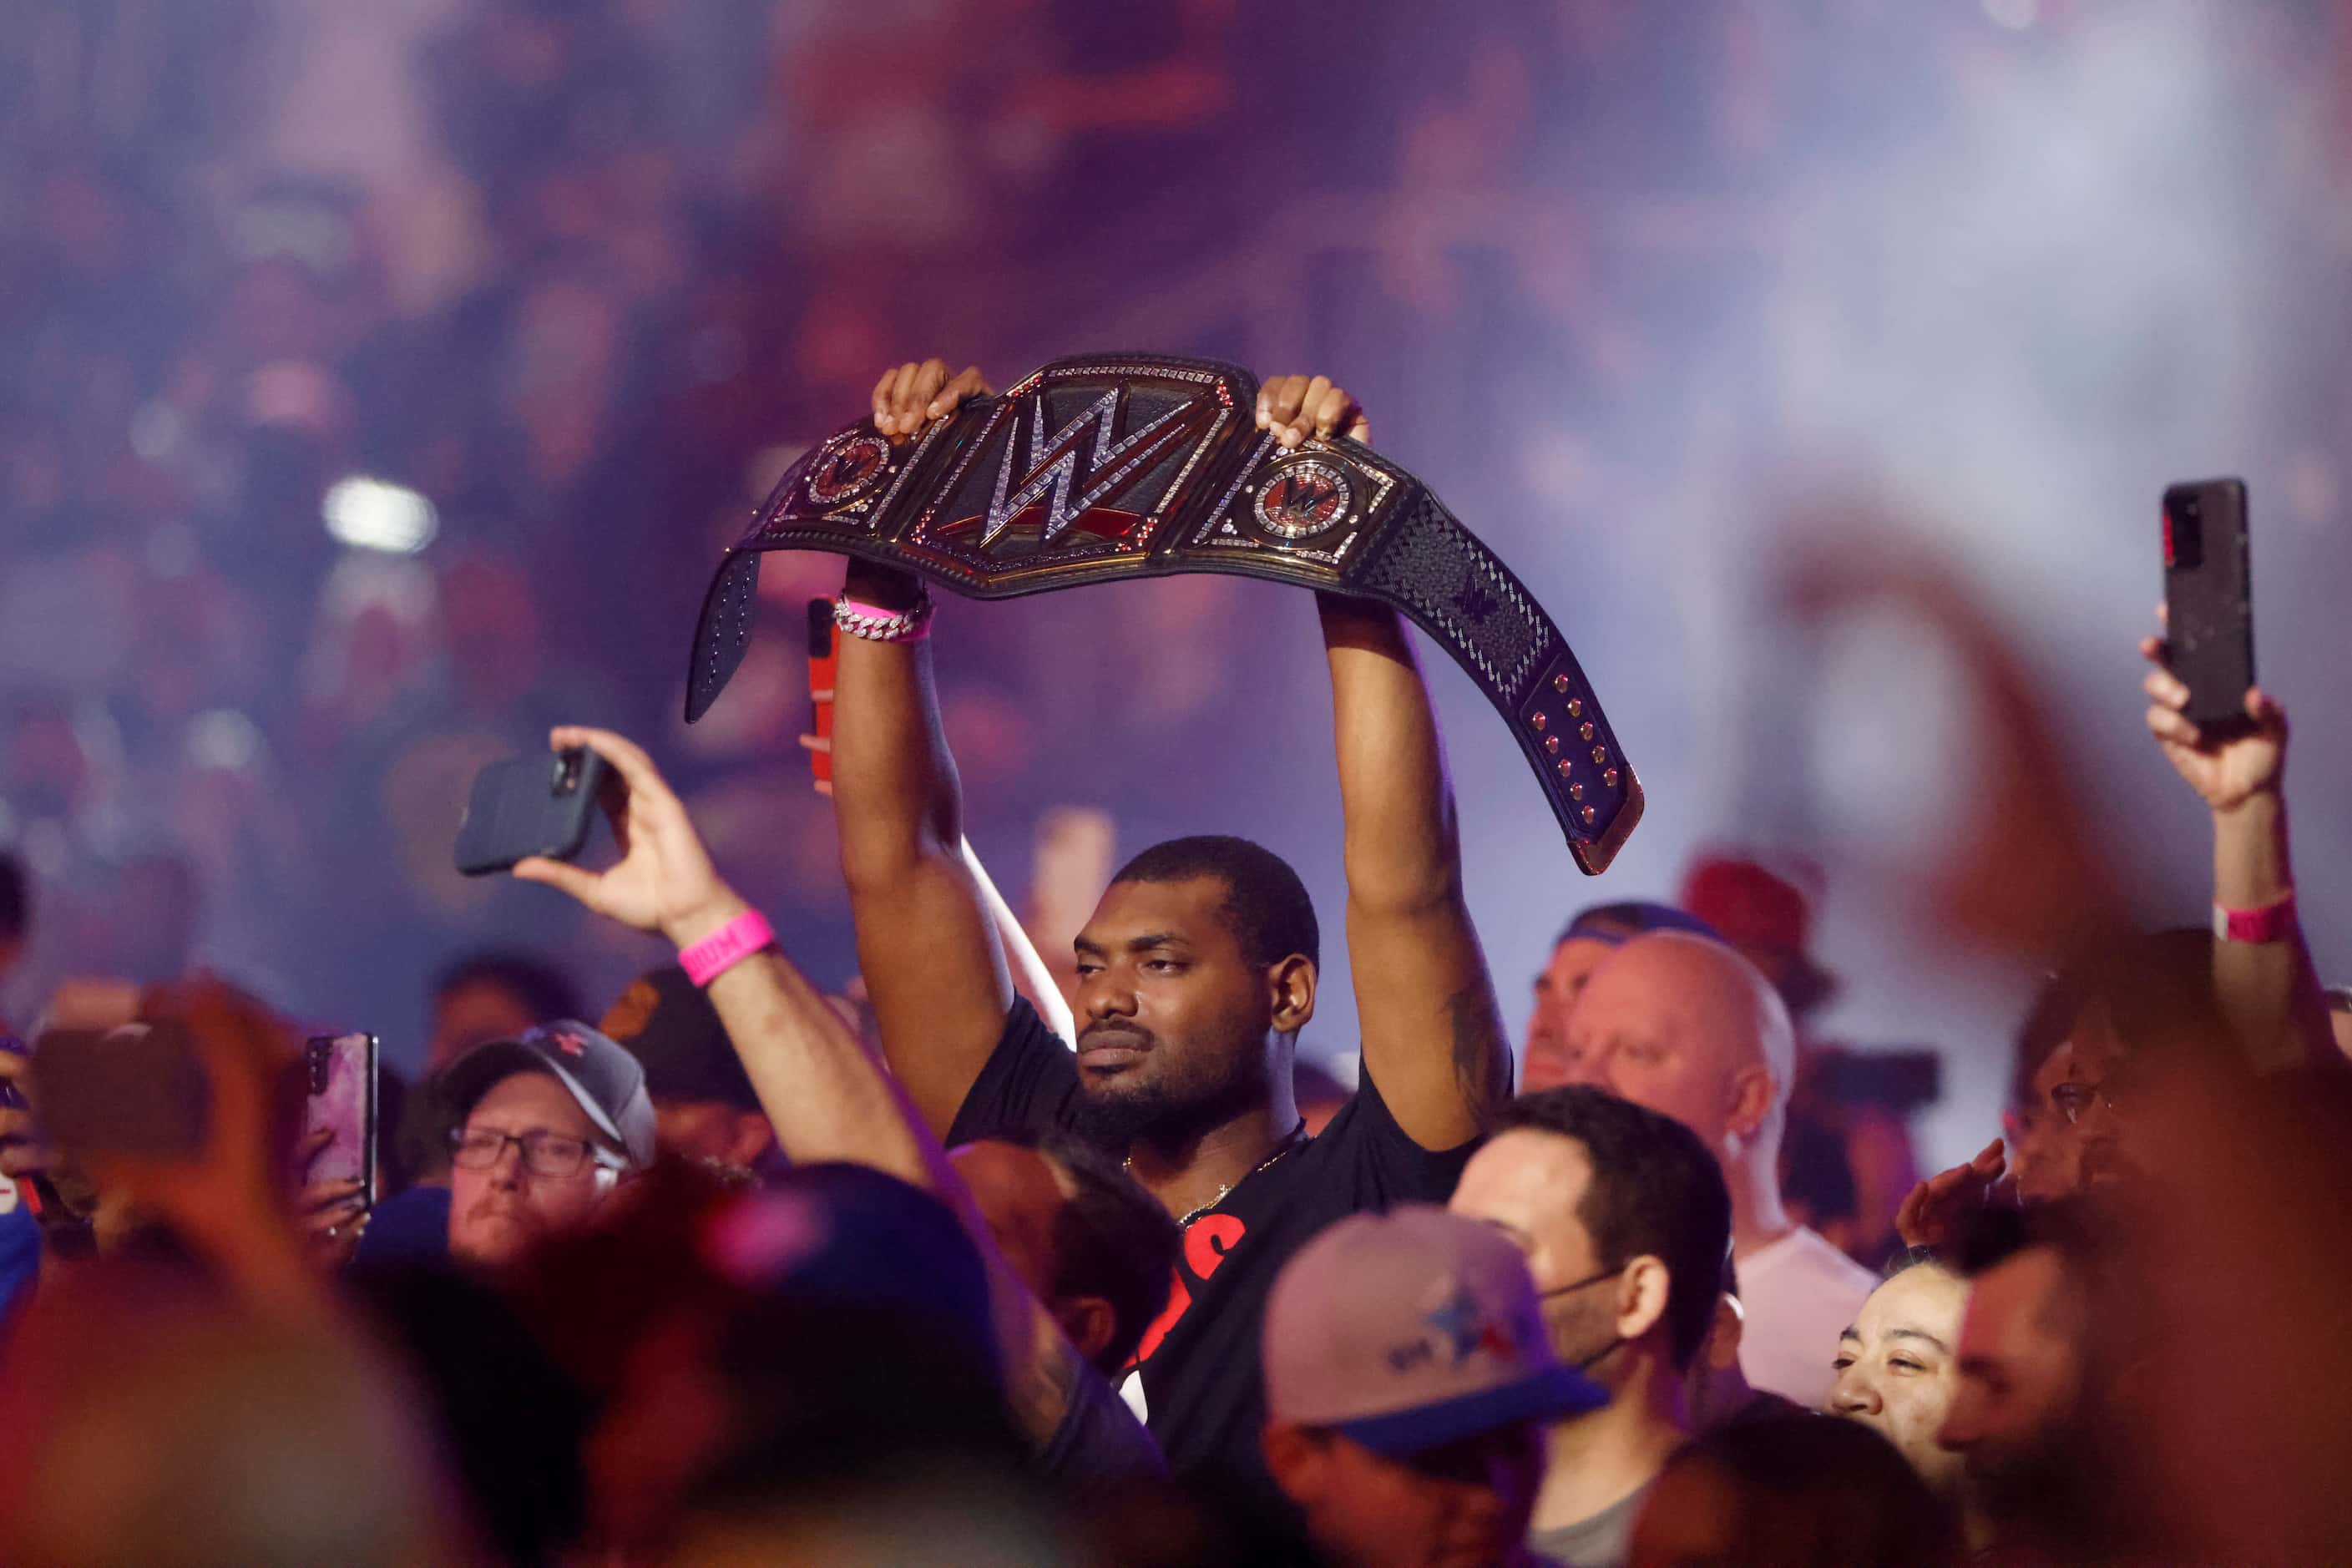 A WWE fan watches a match during WrestleMania in Arlington, Texas on Saturday, April 2, 2022. 